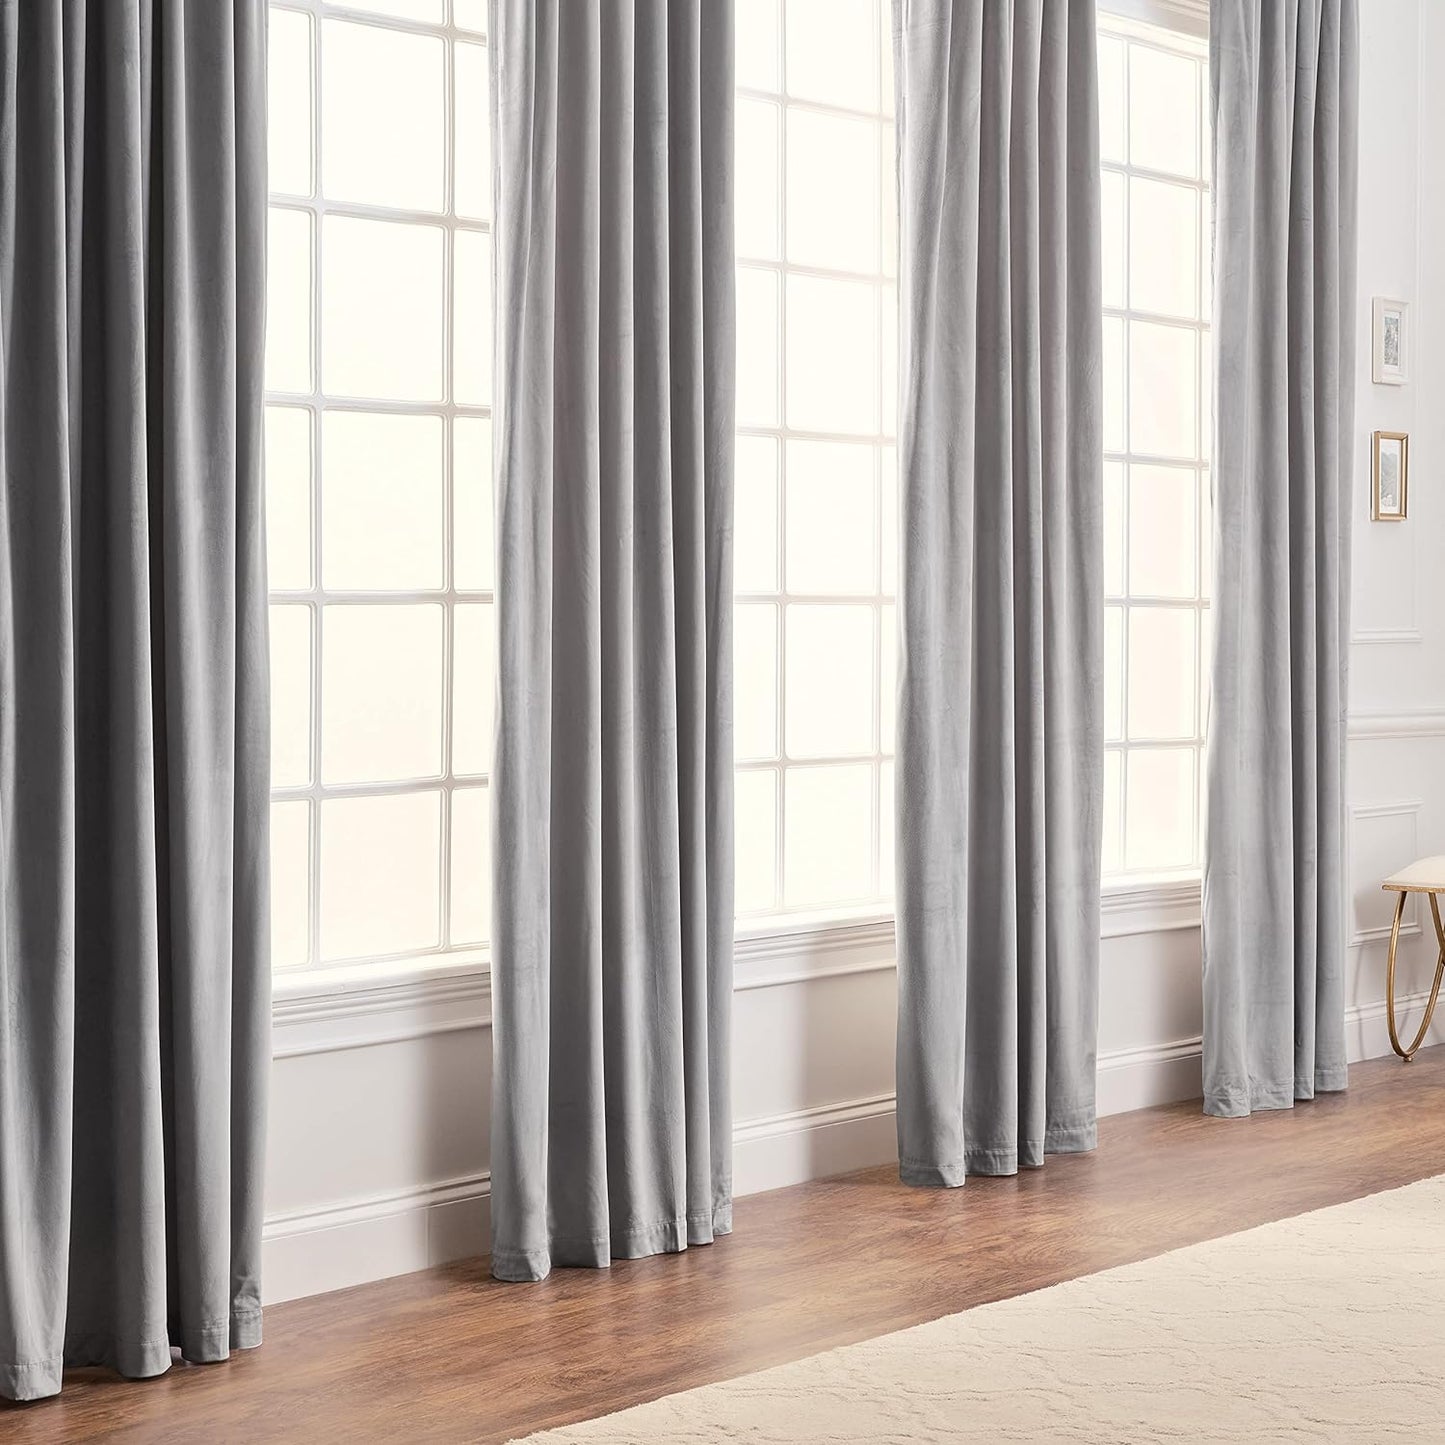 Chanasya Premium Solid Velvet Curtains - Classy and Solid Drapes for Living Room or Bedroom - 52" X 63" - Blush, 2 Panels  PurchaseCorner Silver W52Xh108 Inches 